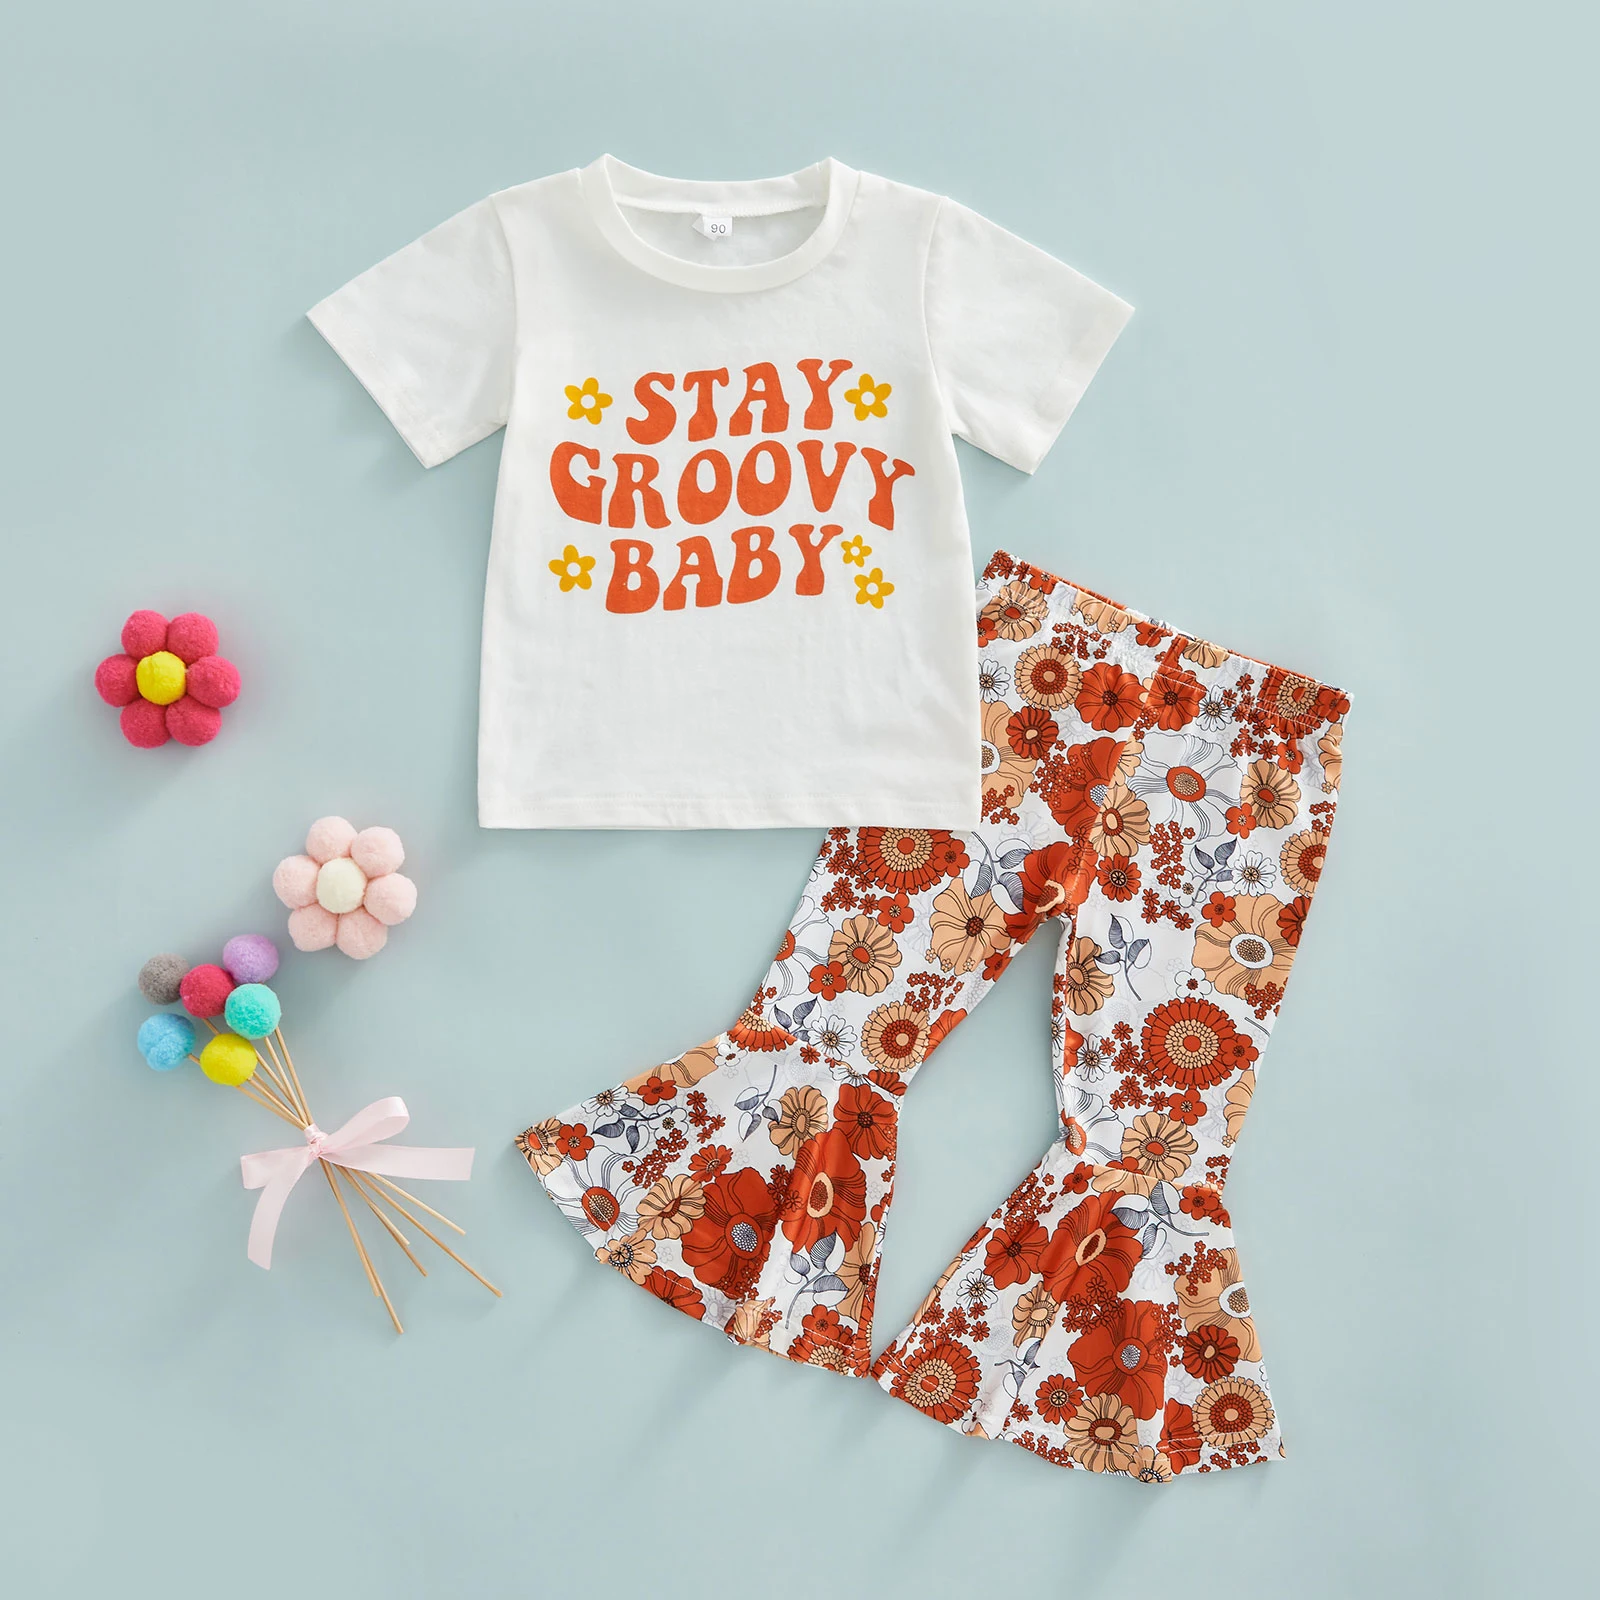 2022 0-6Y Stay Groovy Baby Kids Girl Clothing Letter Print Round Neck Short Sleeve T-shirt+Floral Flare Pants Sweet Summer 2pcs athletic clothing sets	